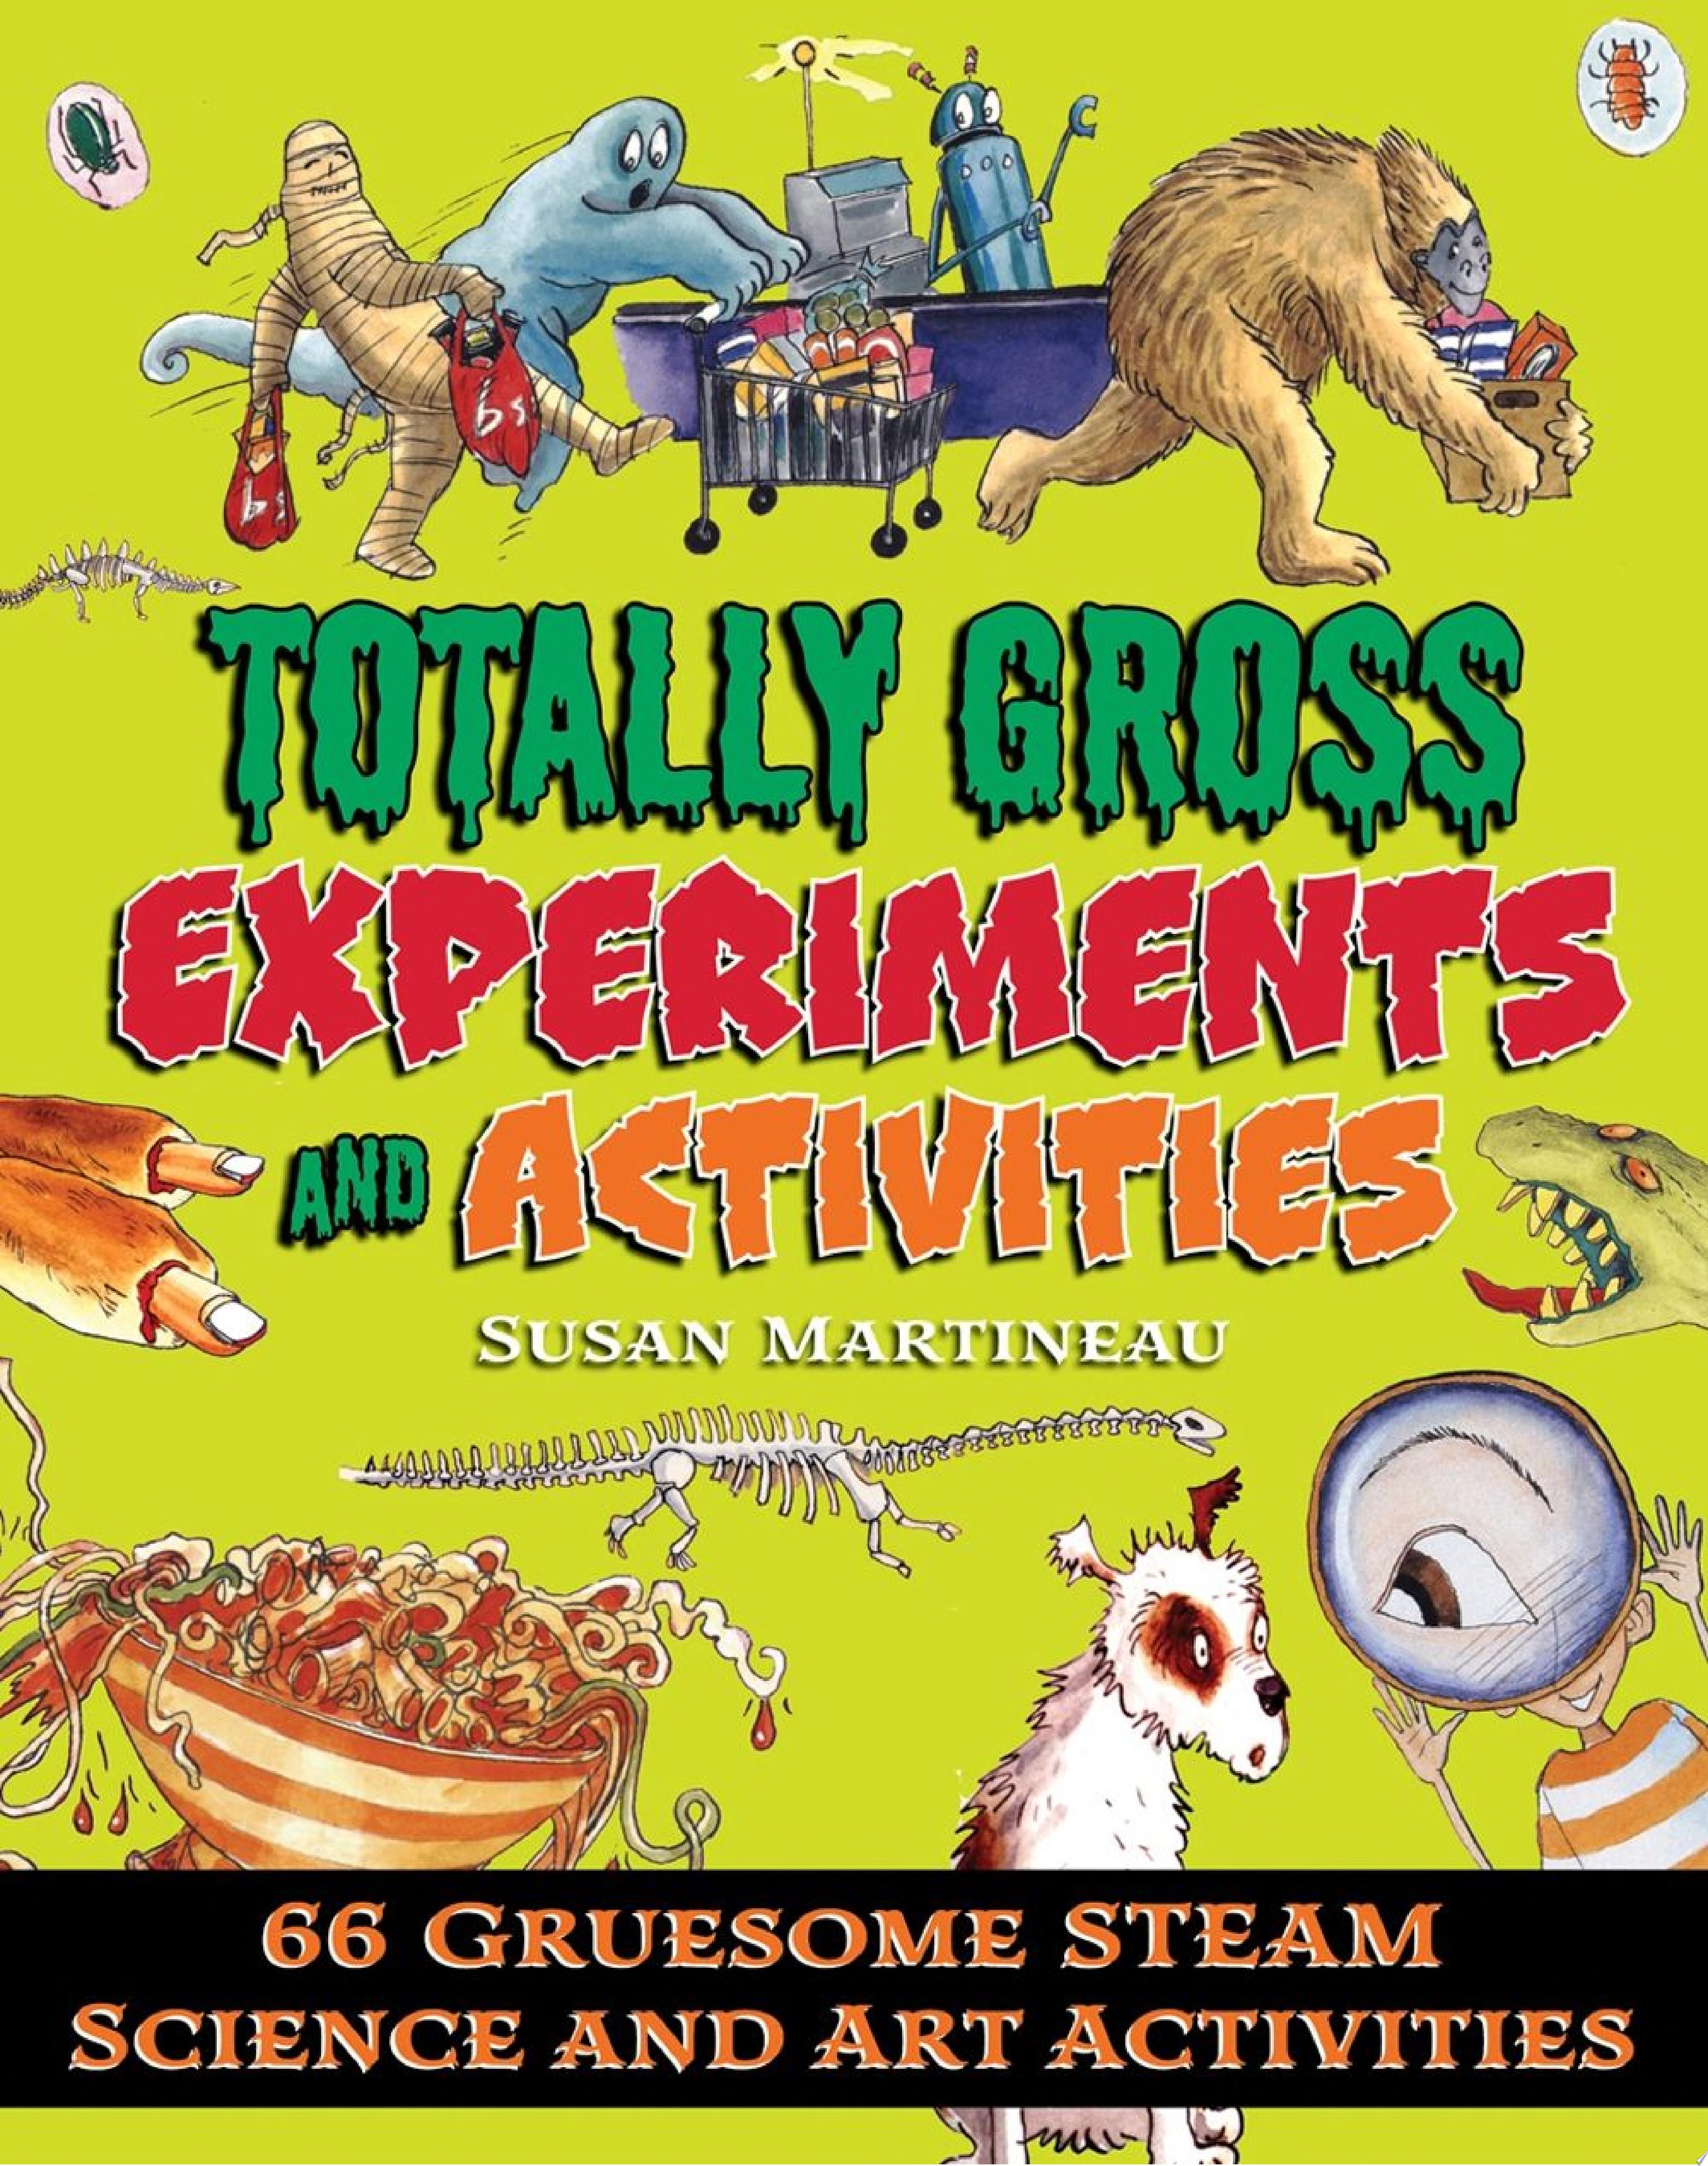 Image for "Totally Gross Experiments and Activities"